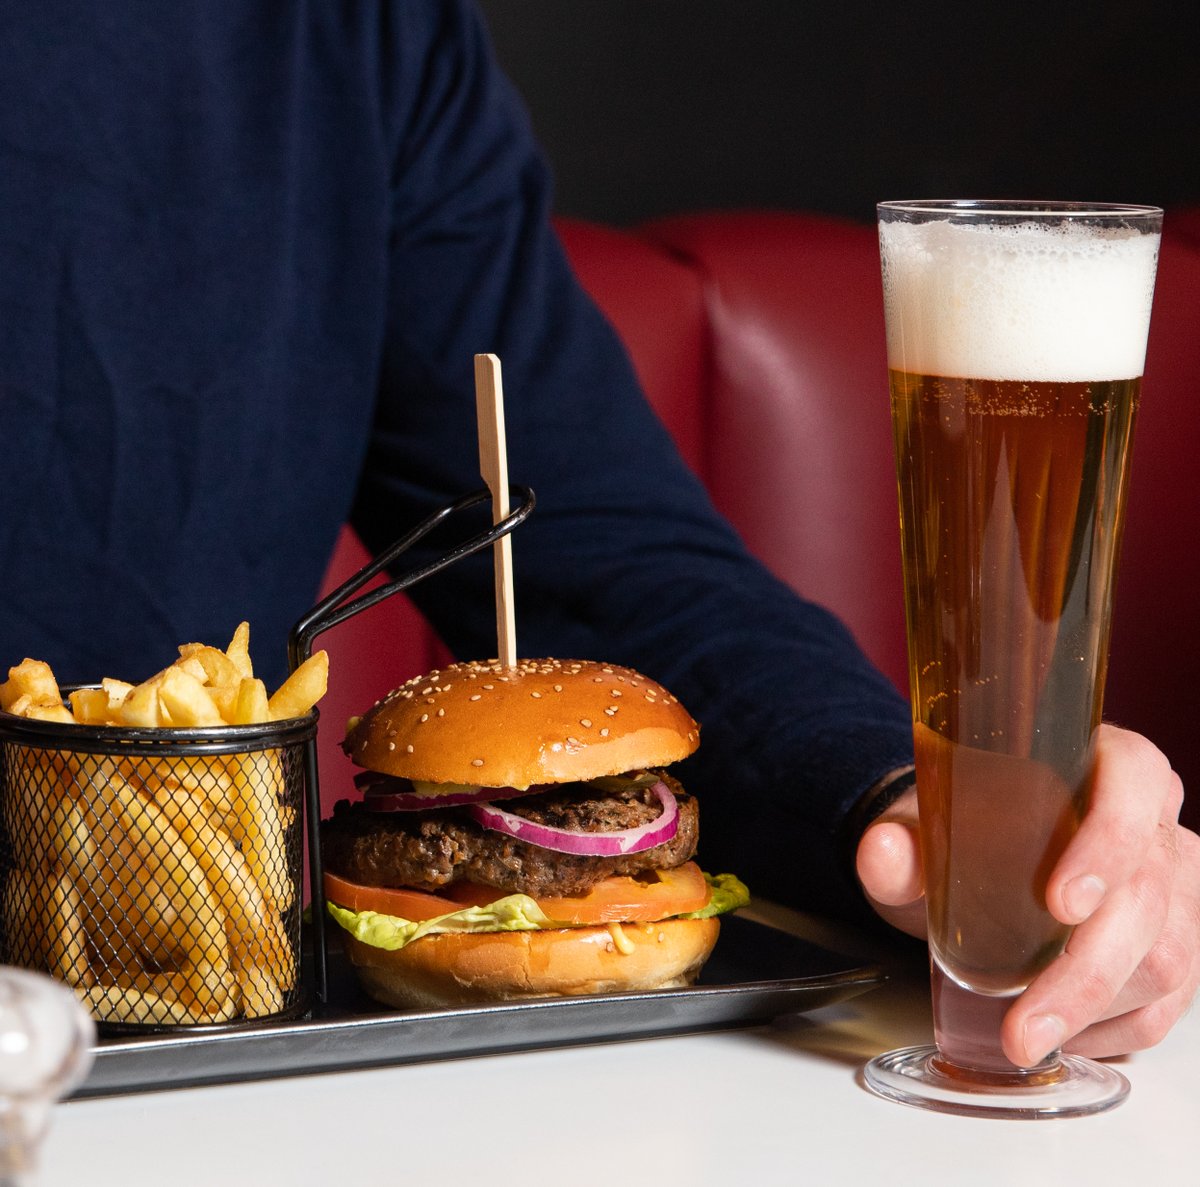 Ready to indulge this weekend? Our juicy 8oz British beef burger is the perfect way to kick things off, paired with crispy fries and an ice-cold beer 🍺 #londonrestaurant #londonfoodscene #kensington